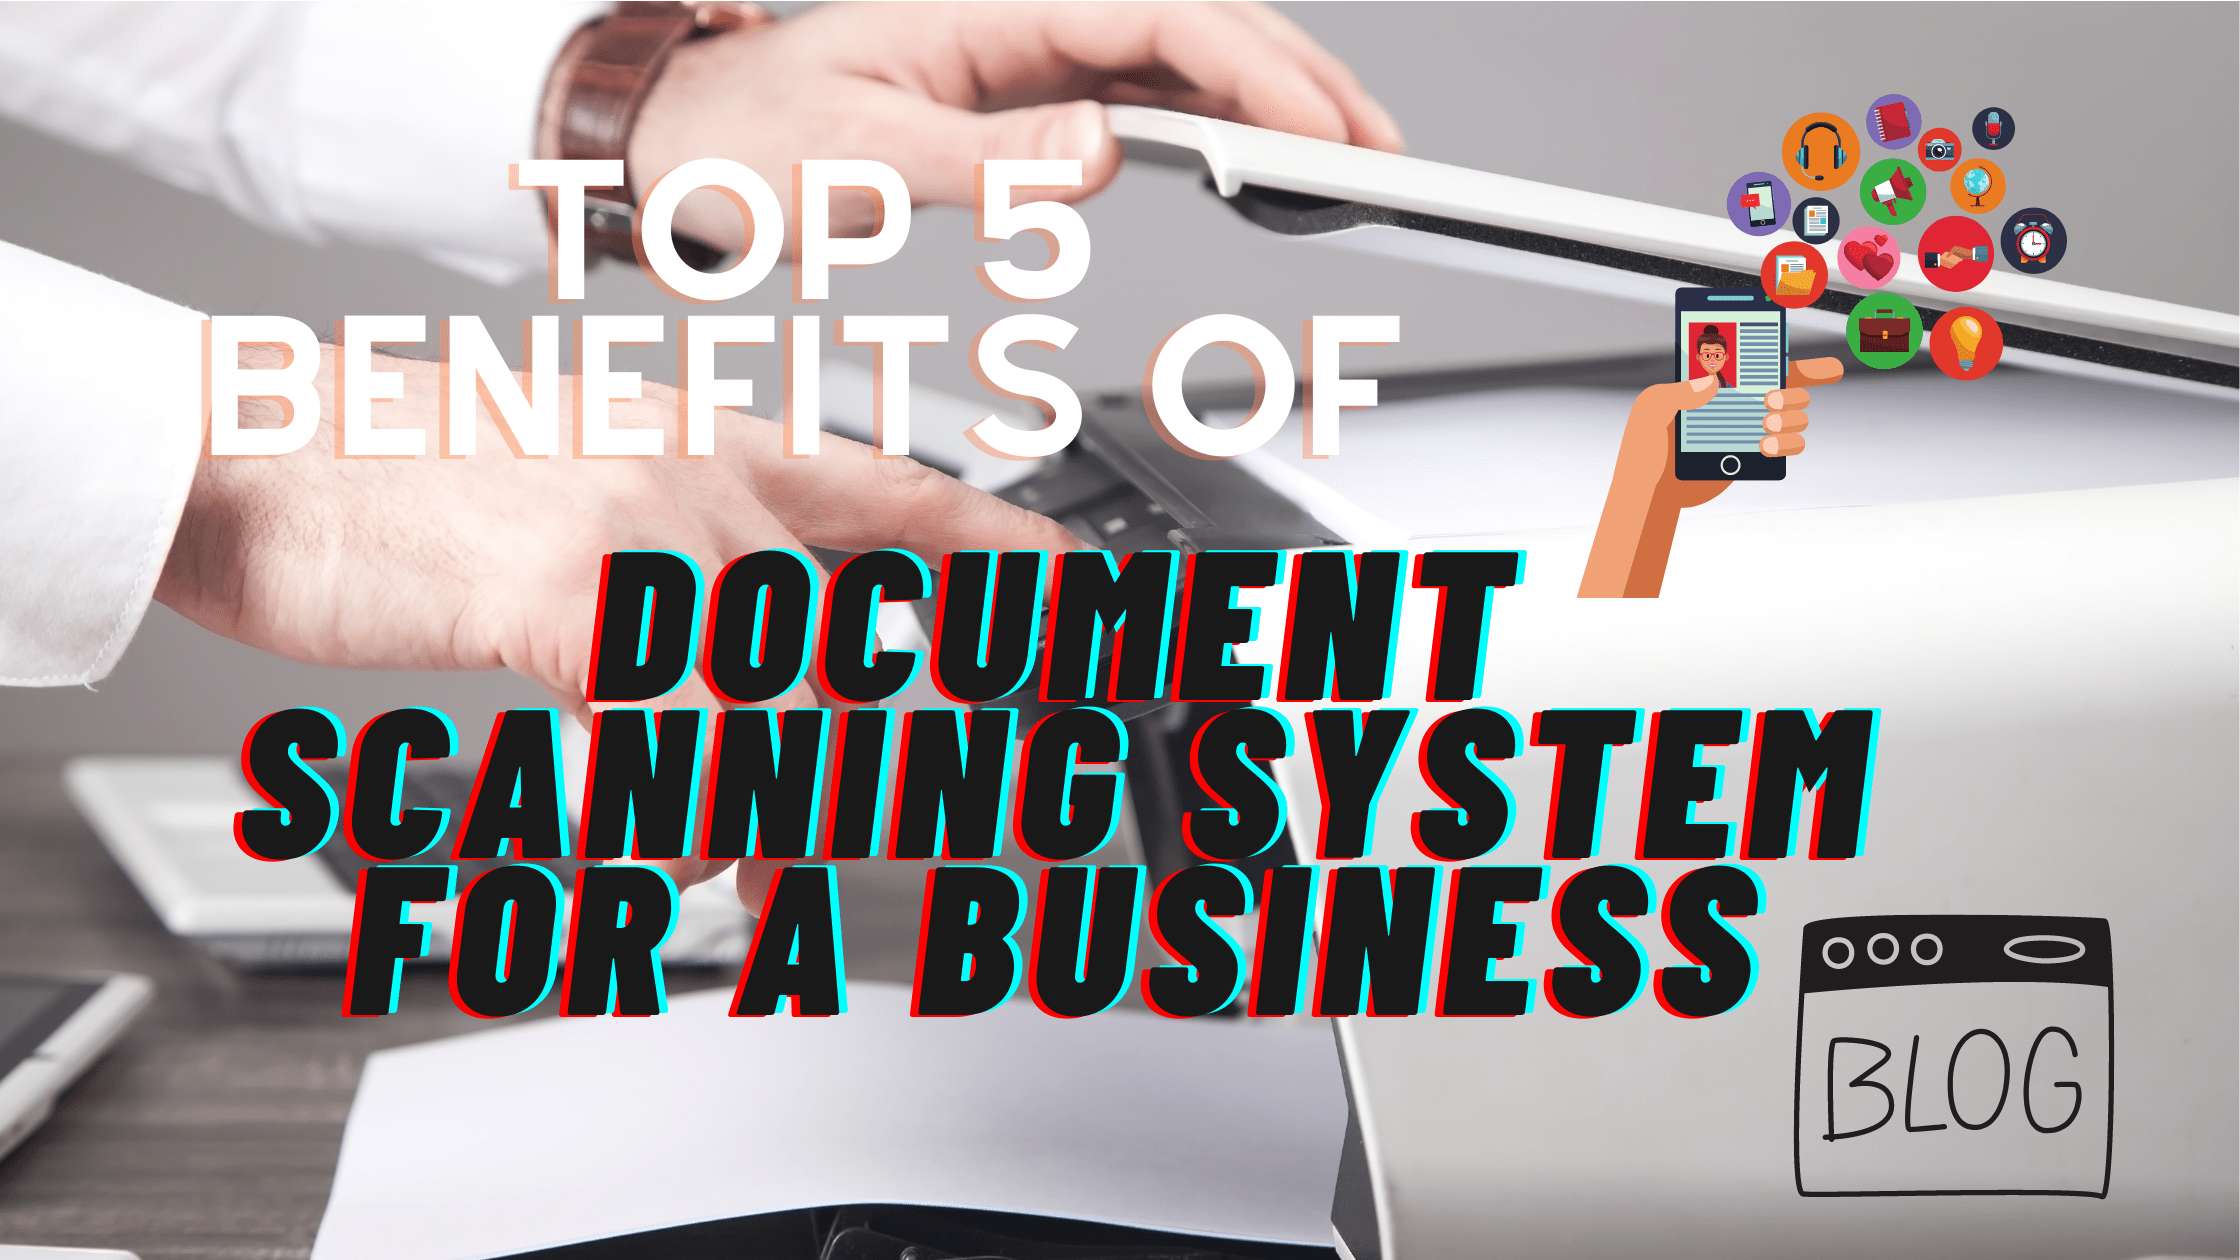 Top 5 benefits of Document Scanning System for a business